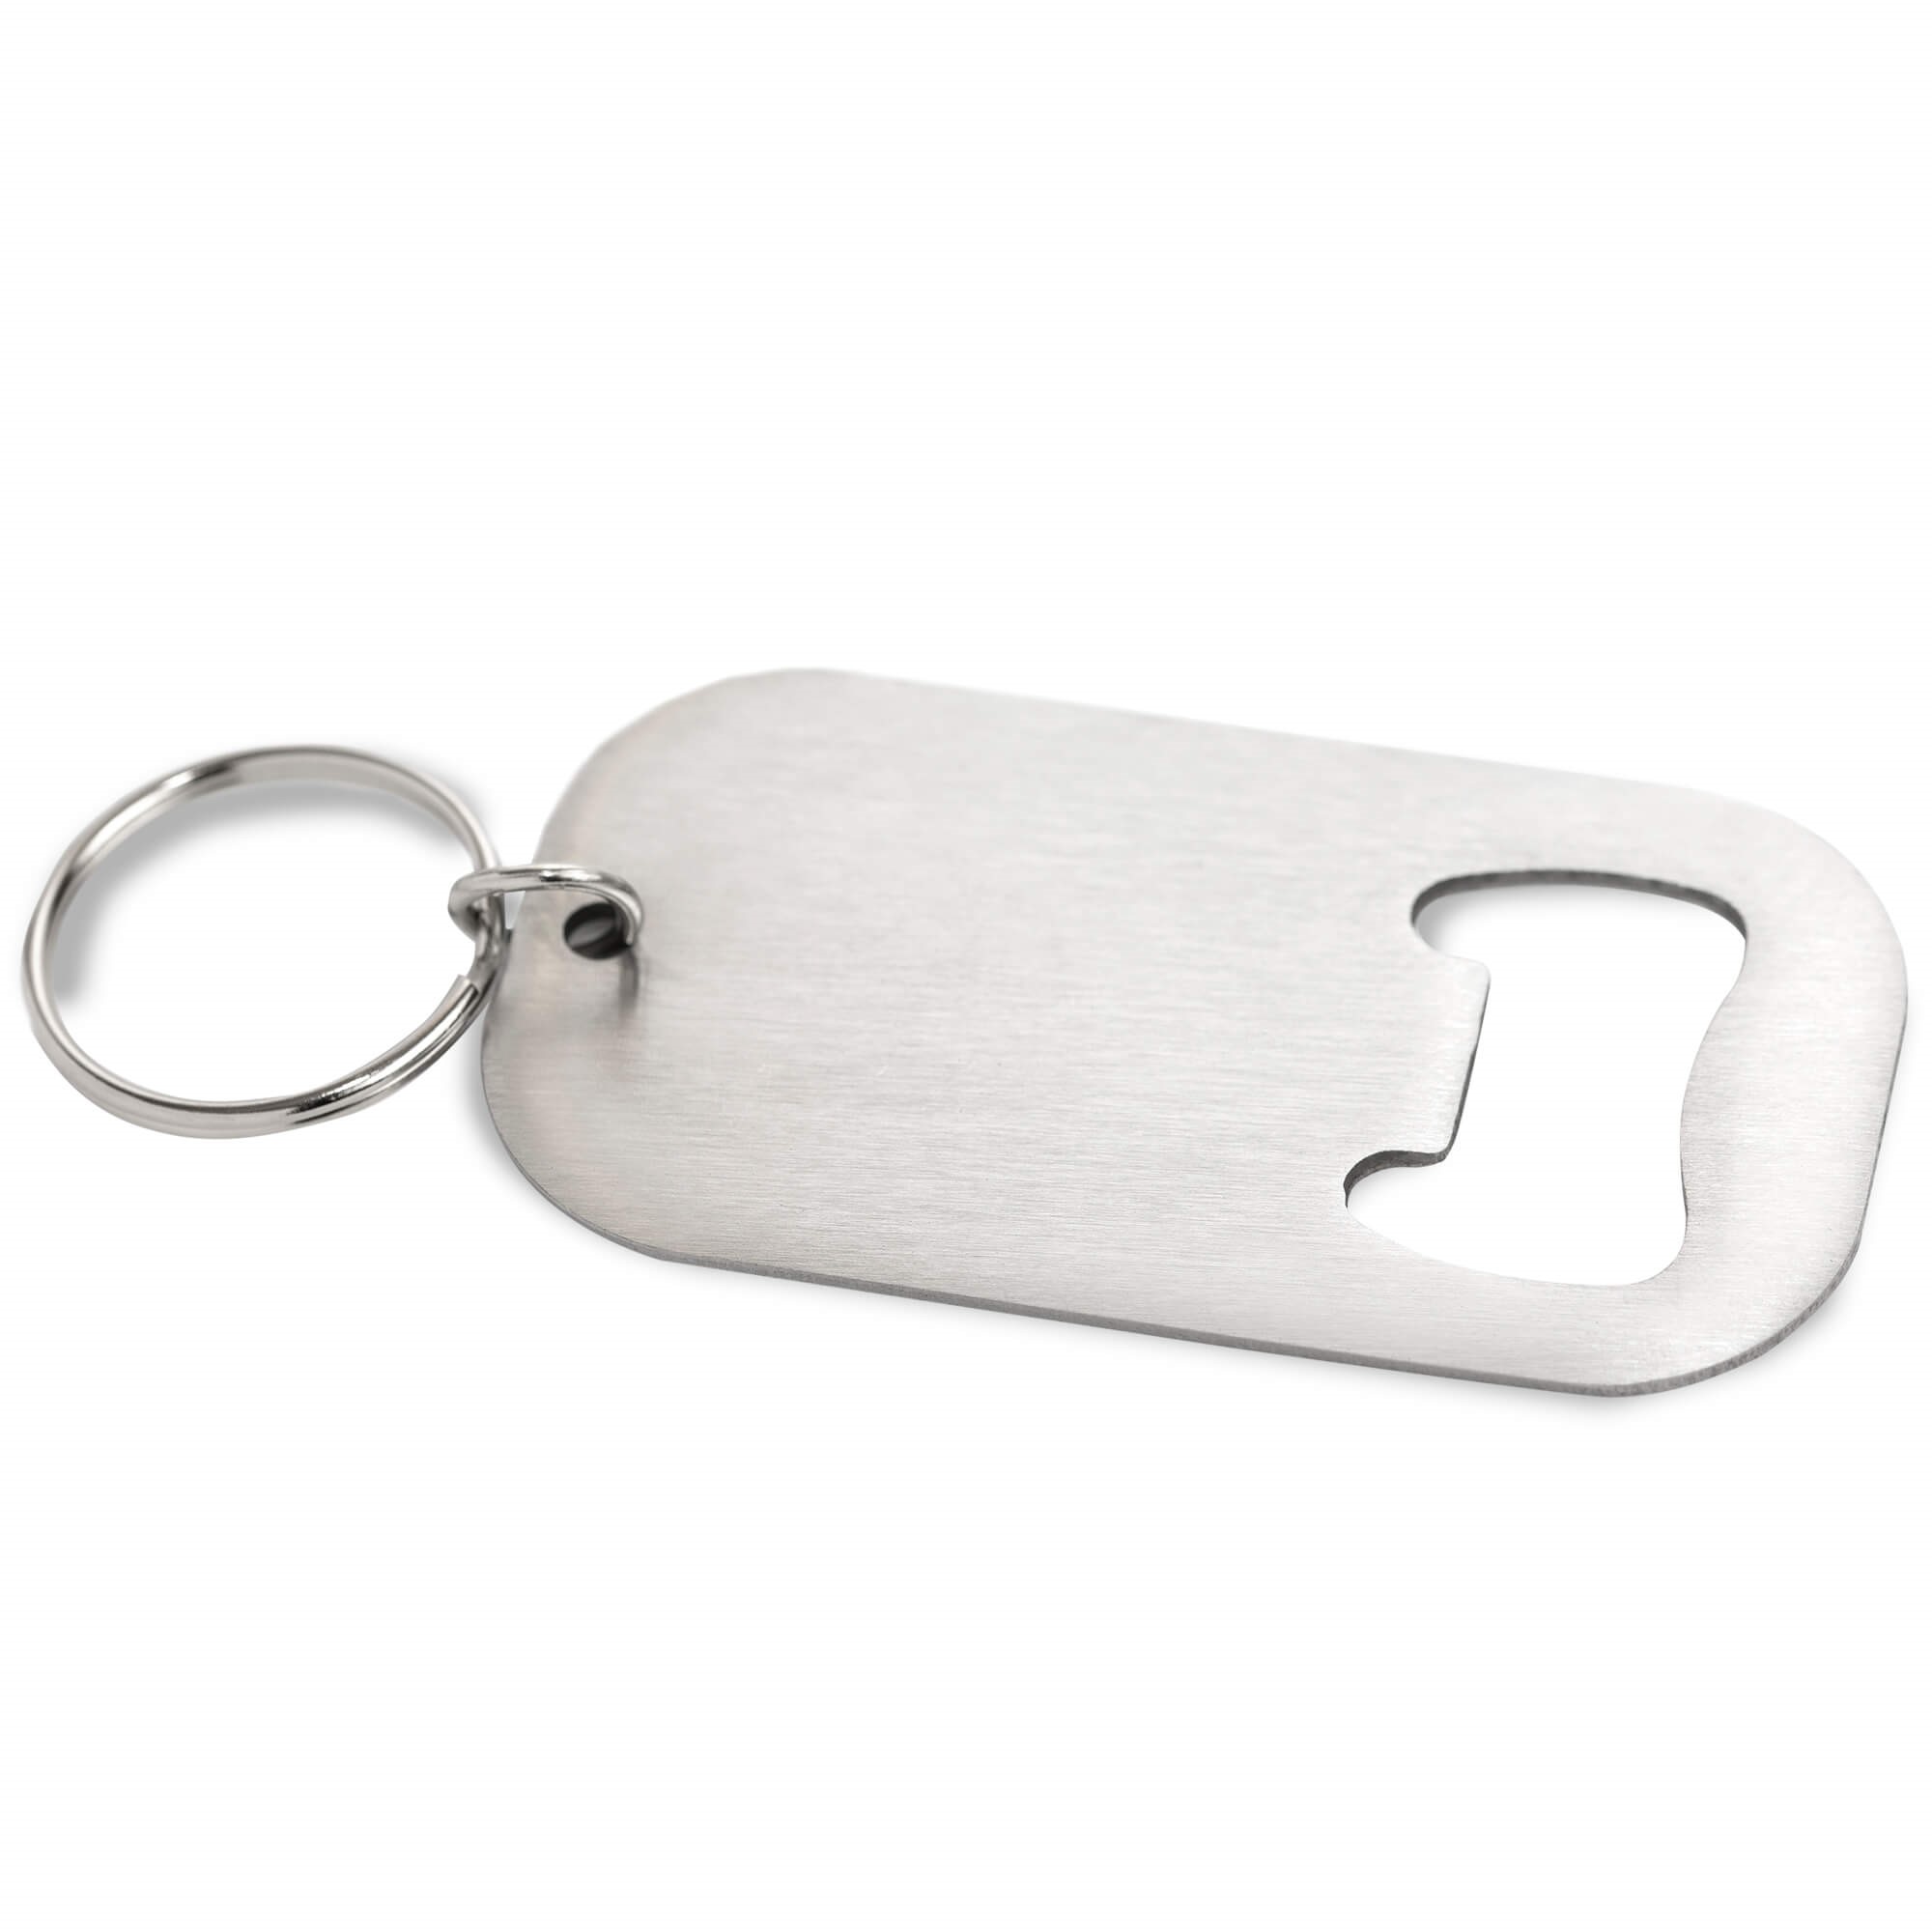 Key ring bottle opener stainless steel 70mm x 38mm with key ring ø25mm